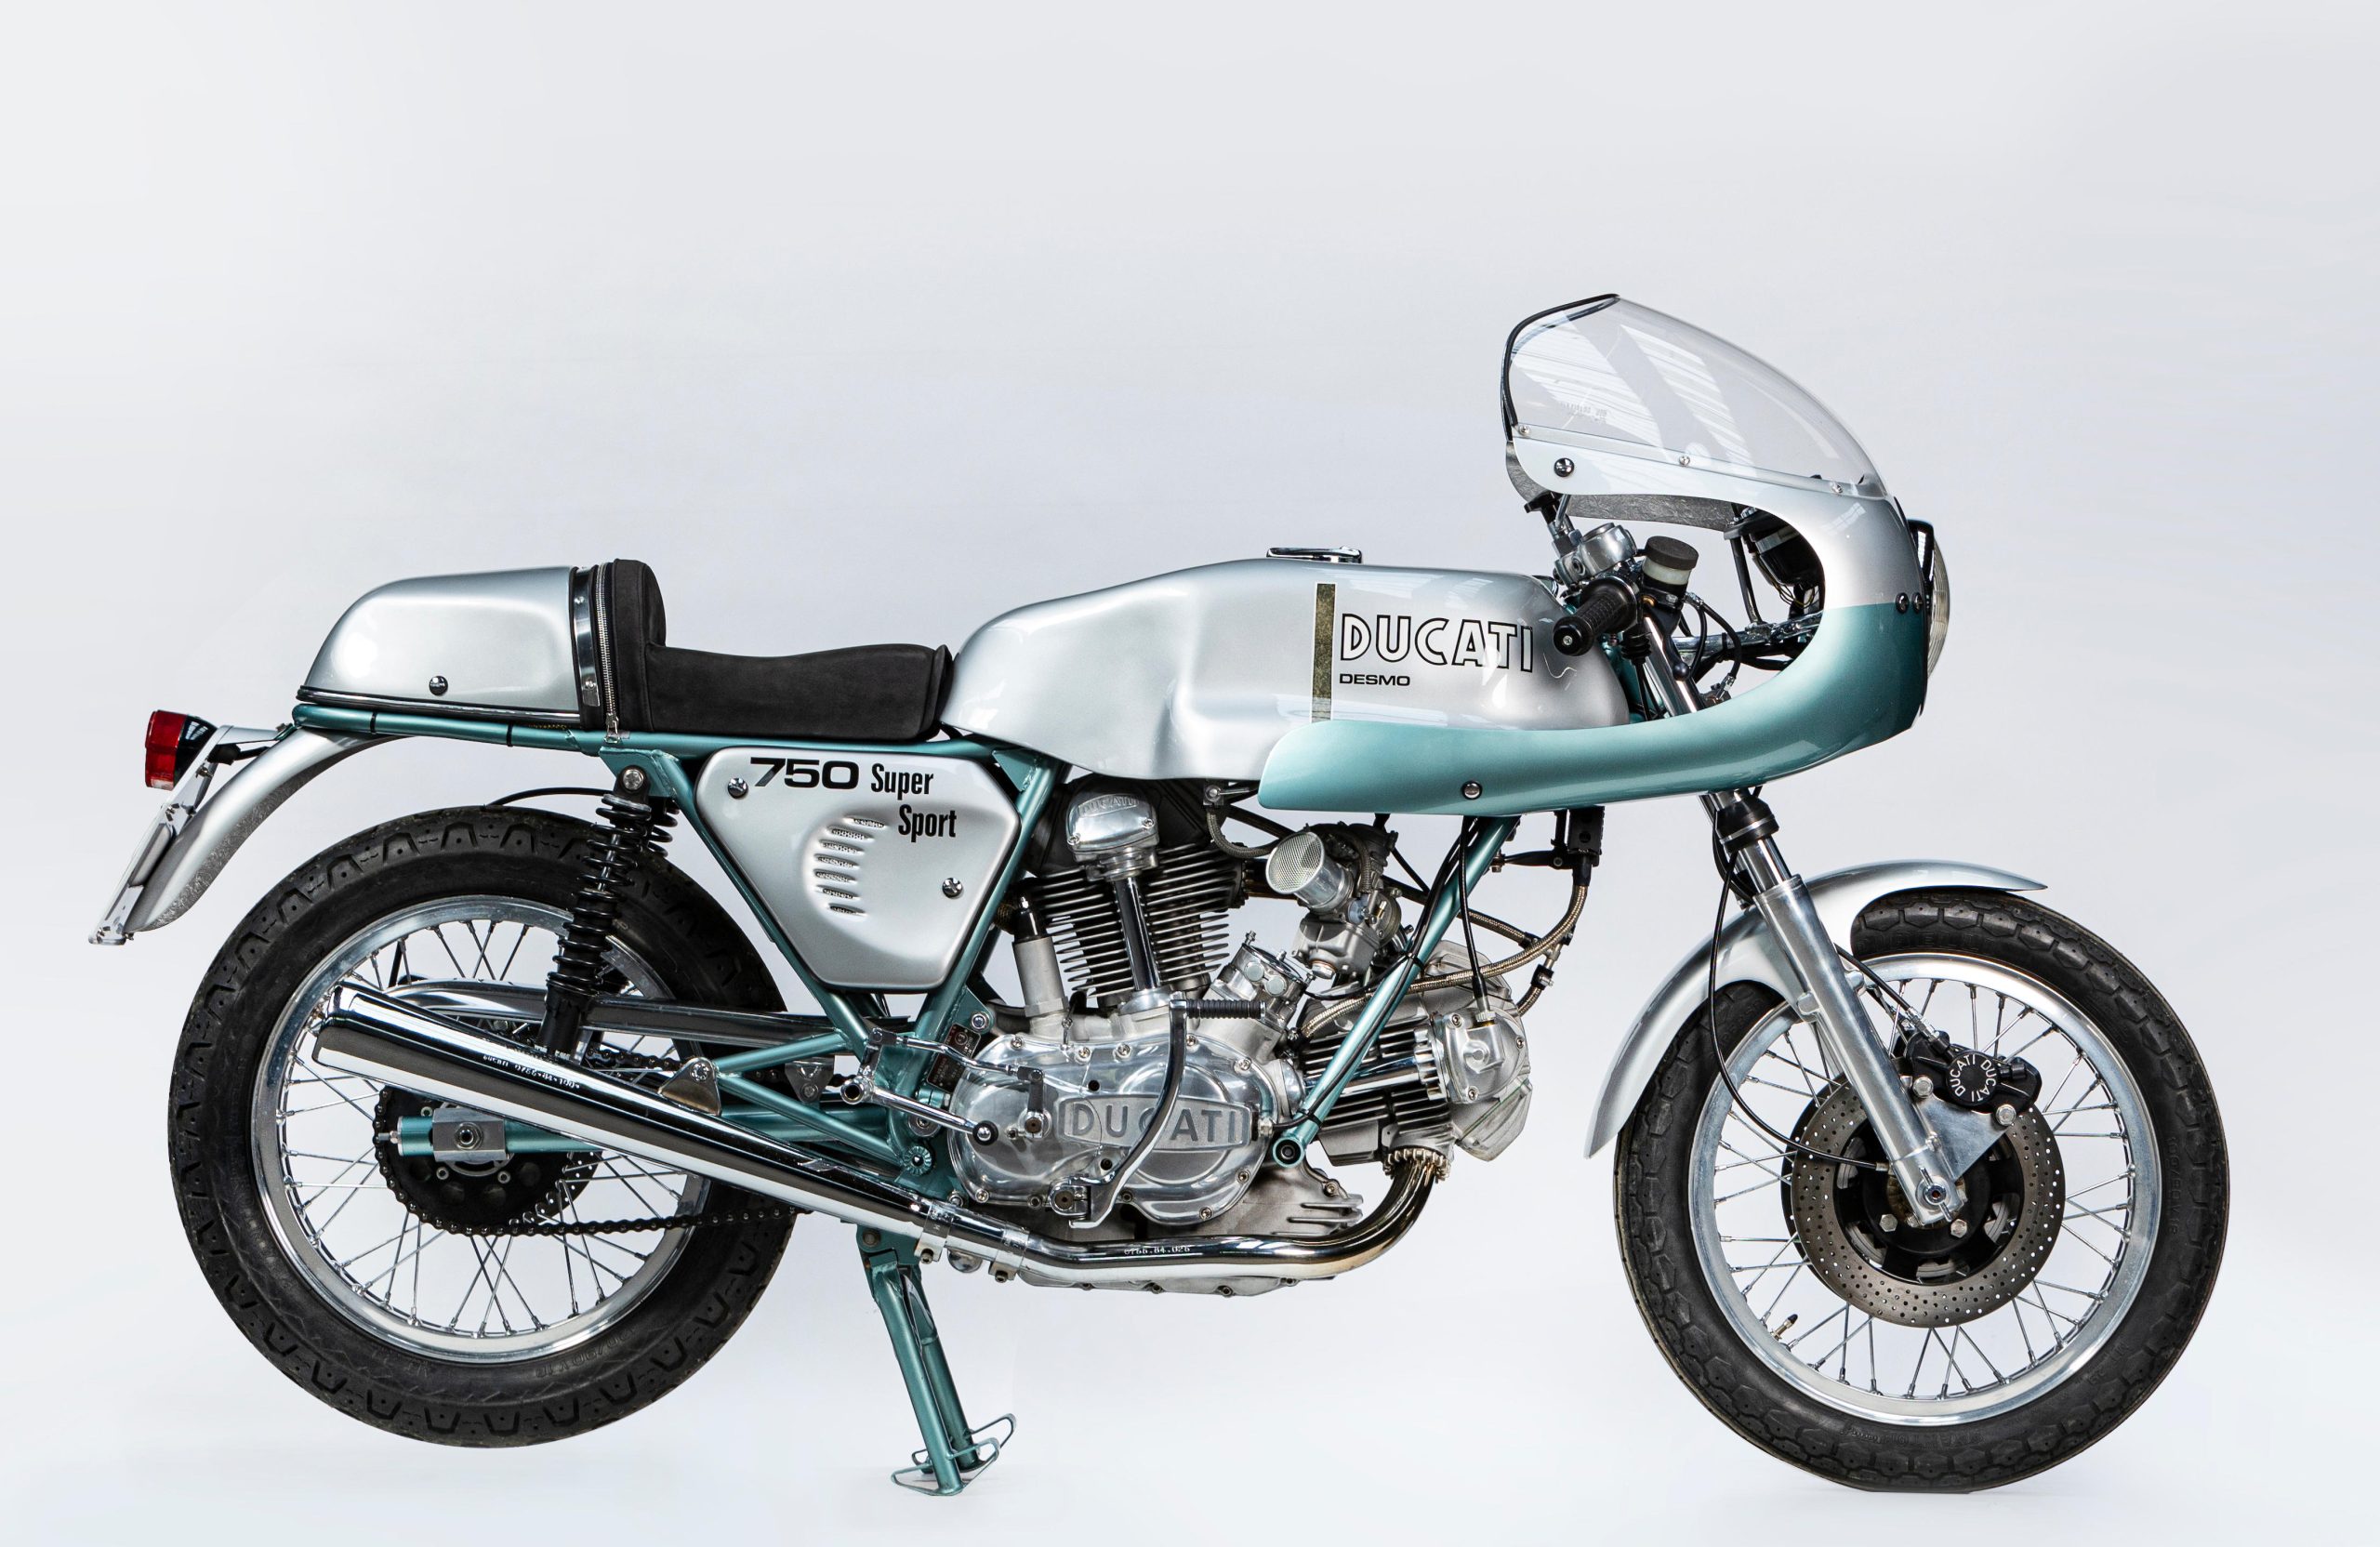 Classic motorcycles are flying out of the UK at full throttle